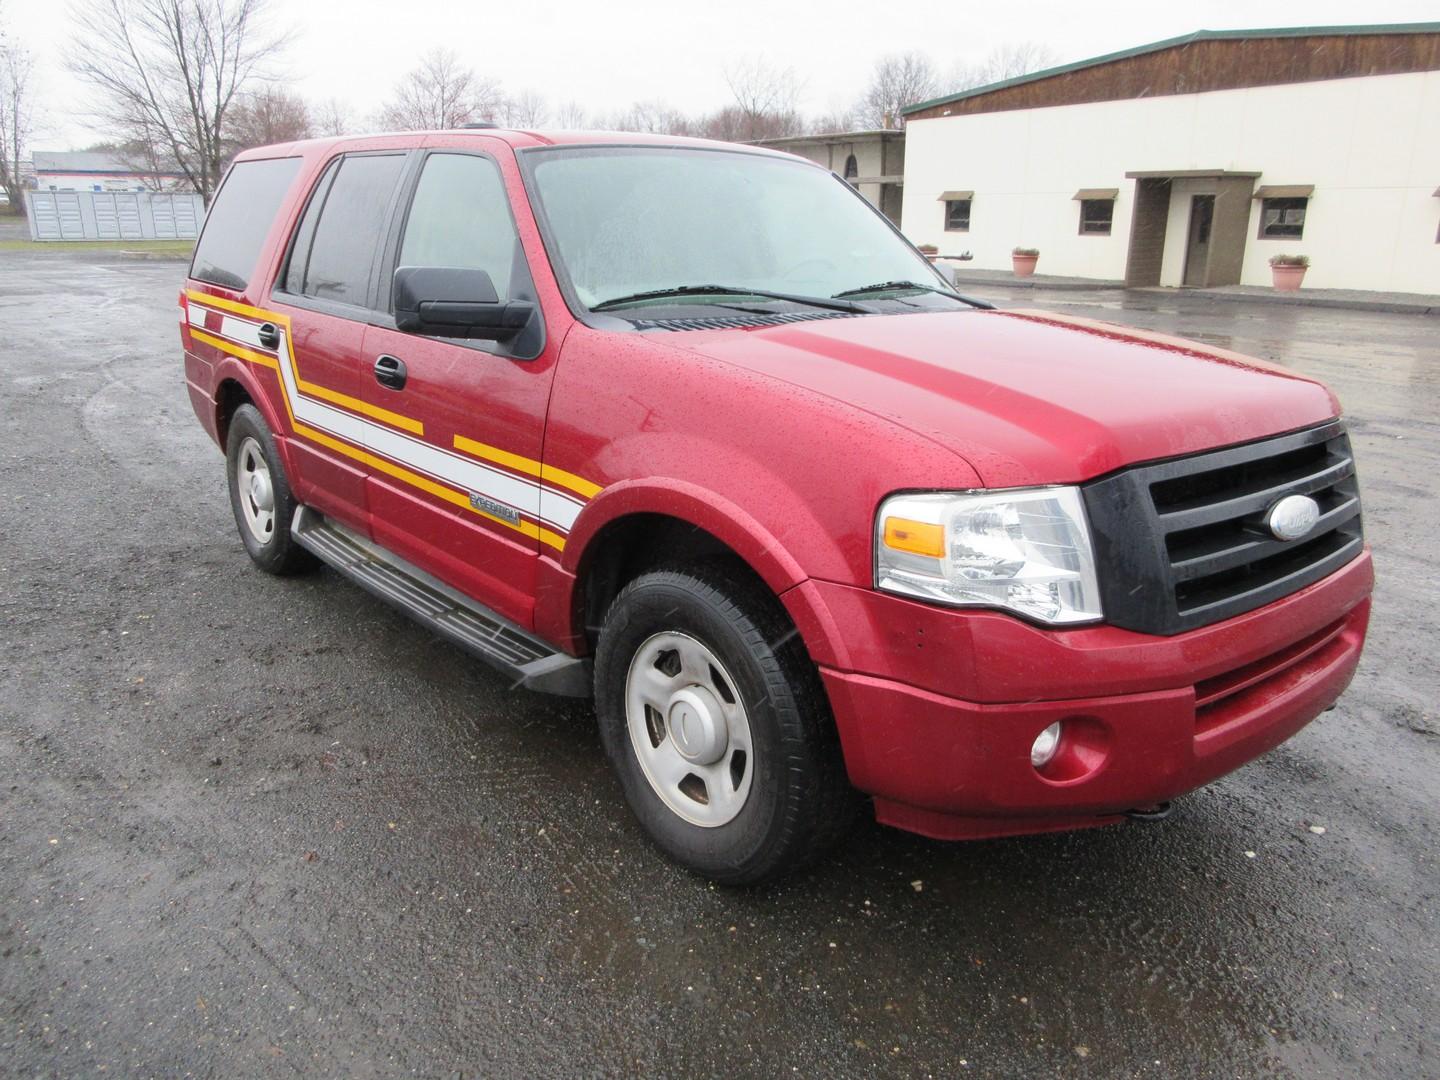 2008 Ford Expedition XLT SUV